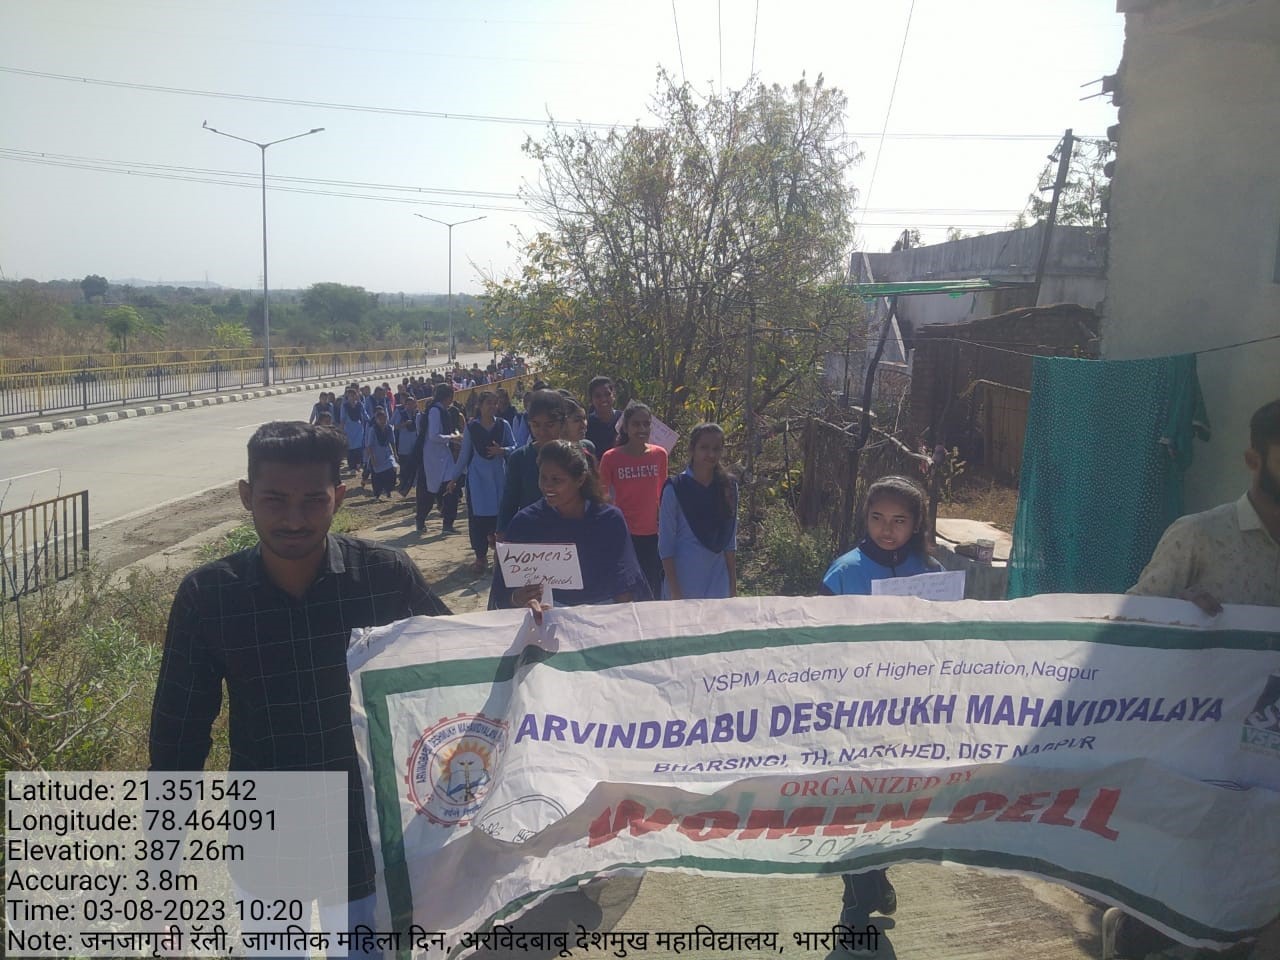 <p>On the occasion of&nbsp;International Women&#39;s Day on date 8th March 2023, the Women cell of Arvindababu Deshmukh Mahavidyalay organized an awareness rally at Inderwada village to commemorate International Women&nbsp;Day. The students and staff actively participated in a rally.&nbsp;</p>
